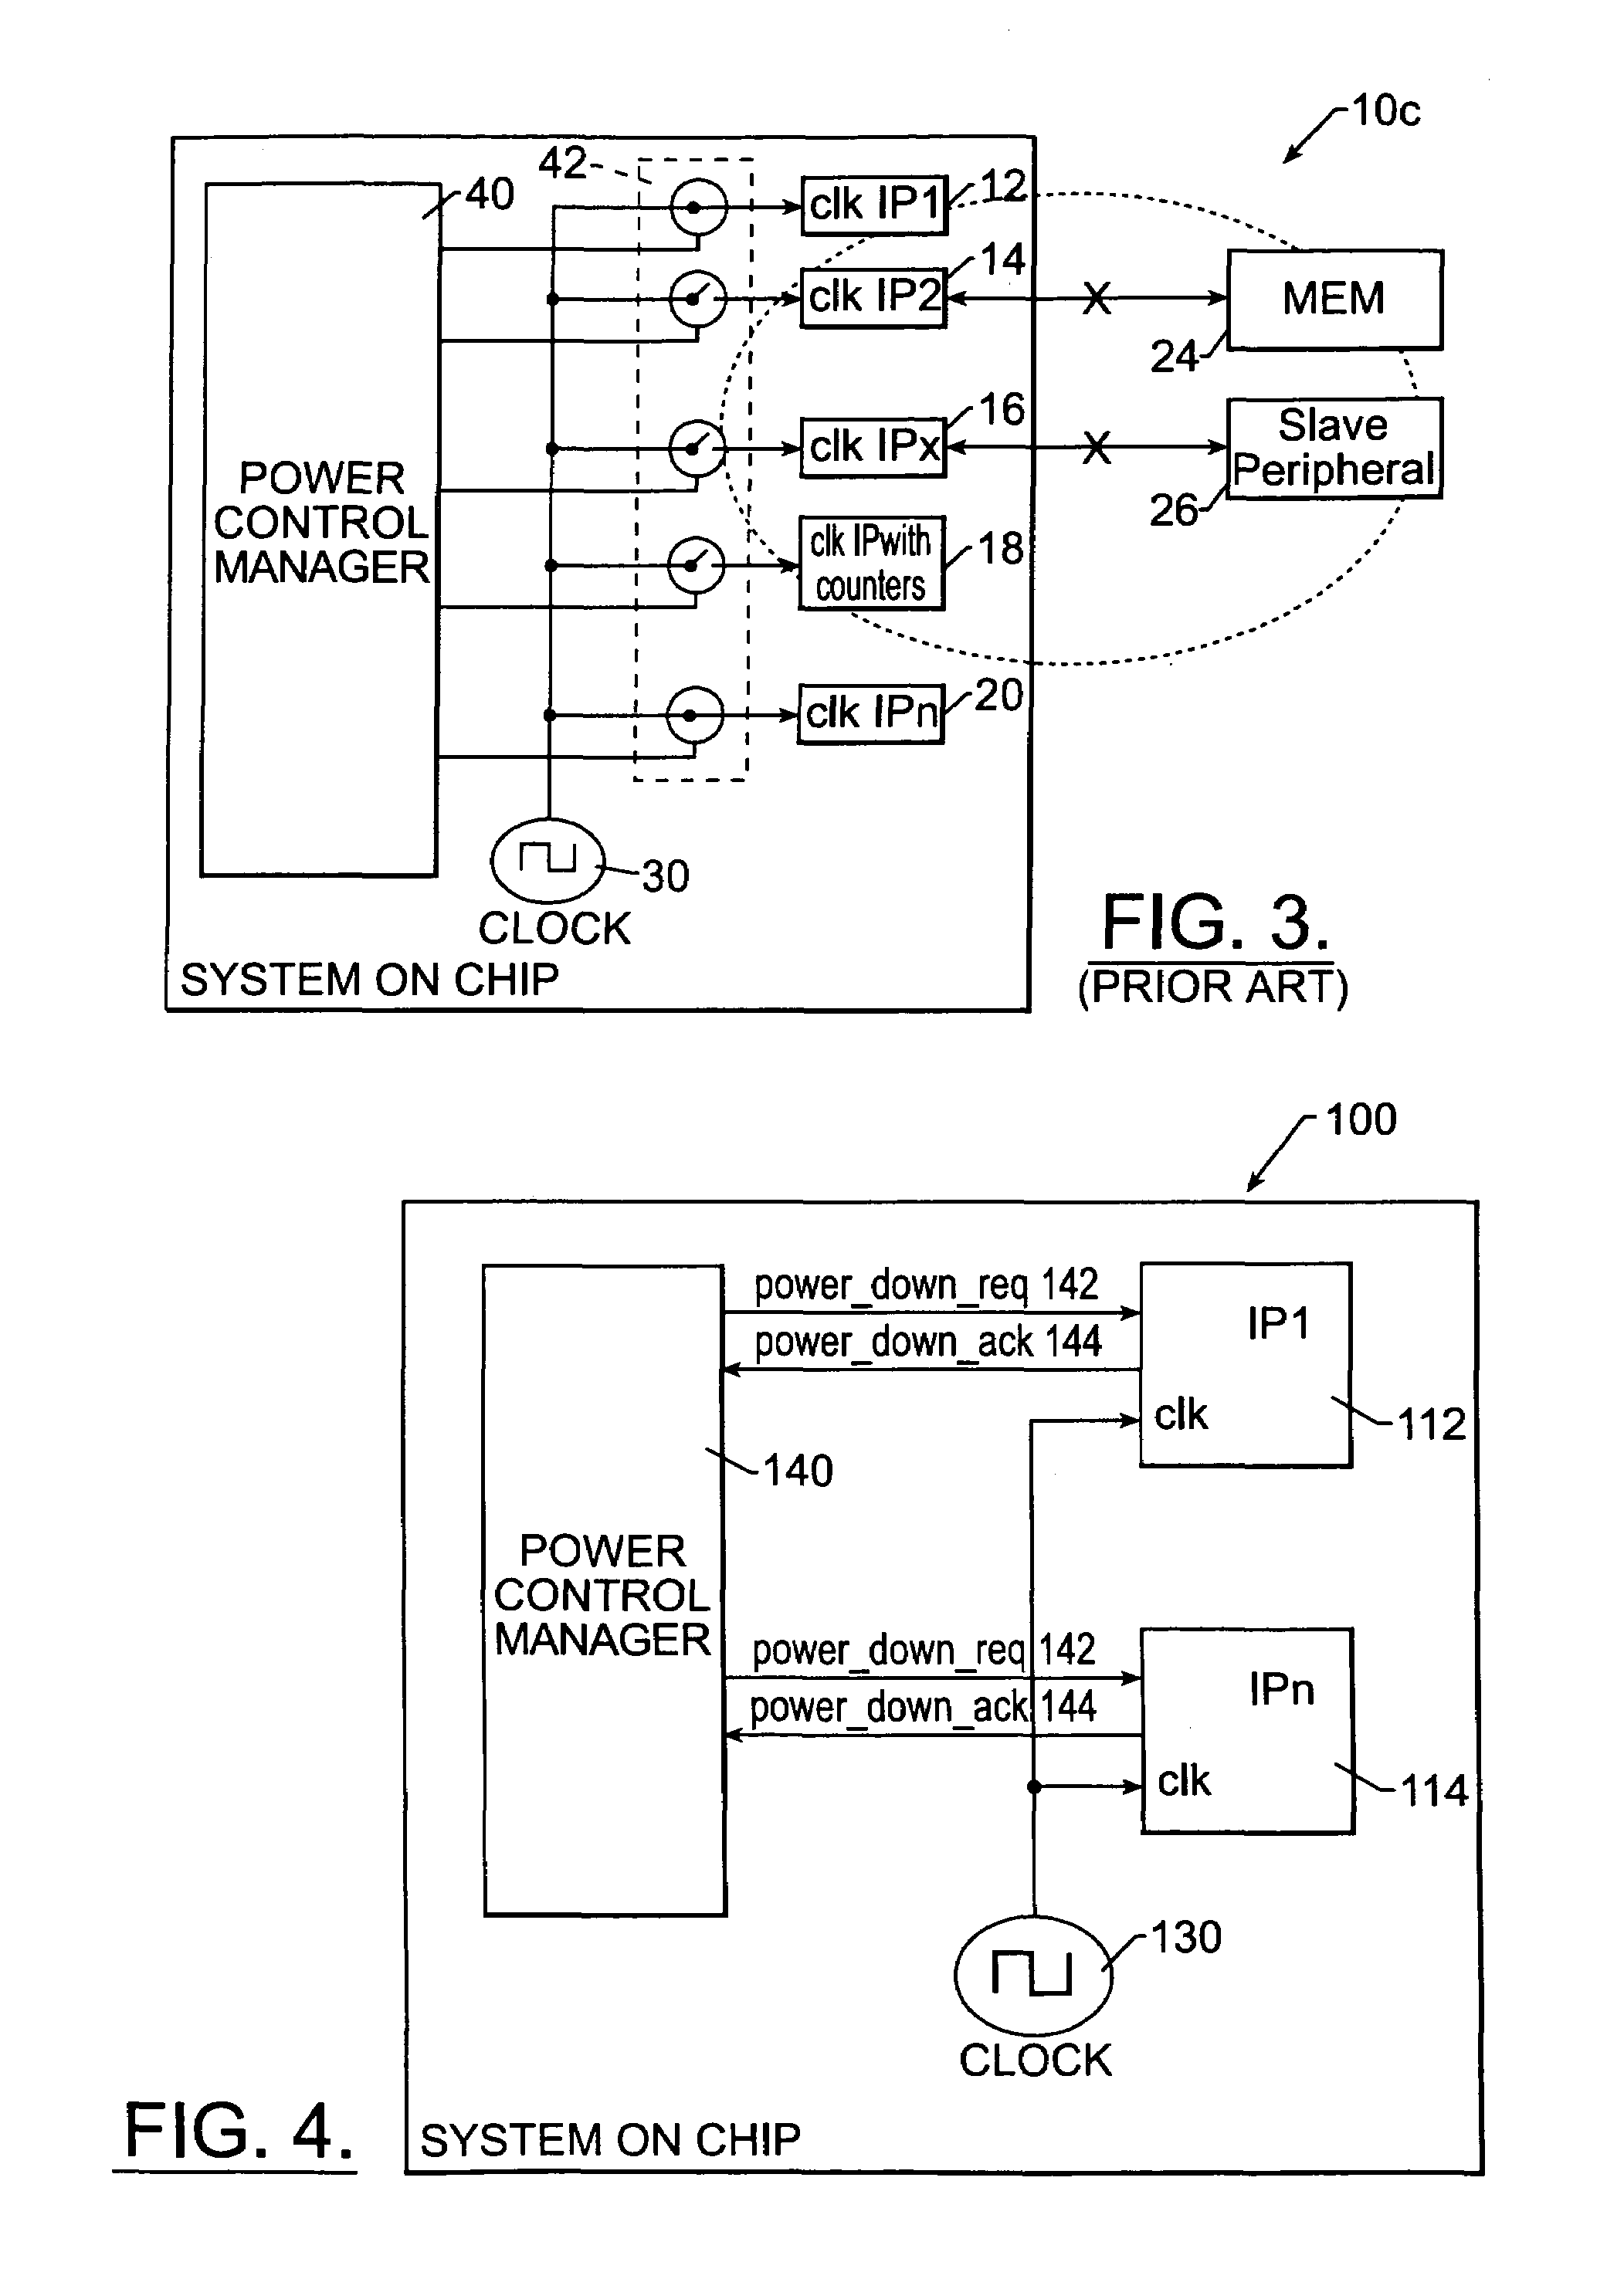 Integrated circuit selective power down protocol based on acknowledgement